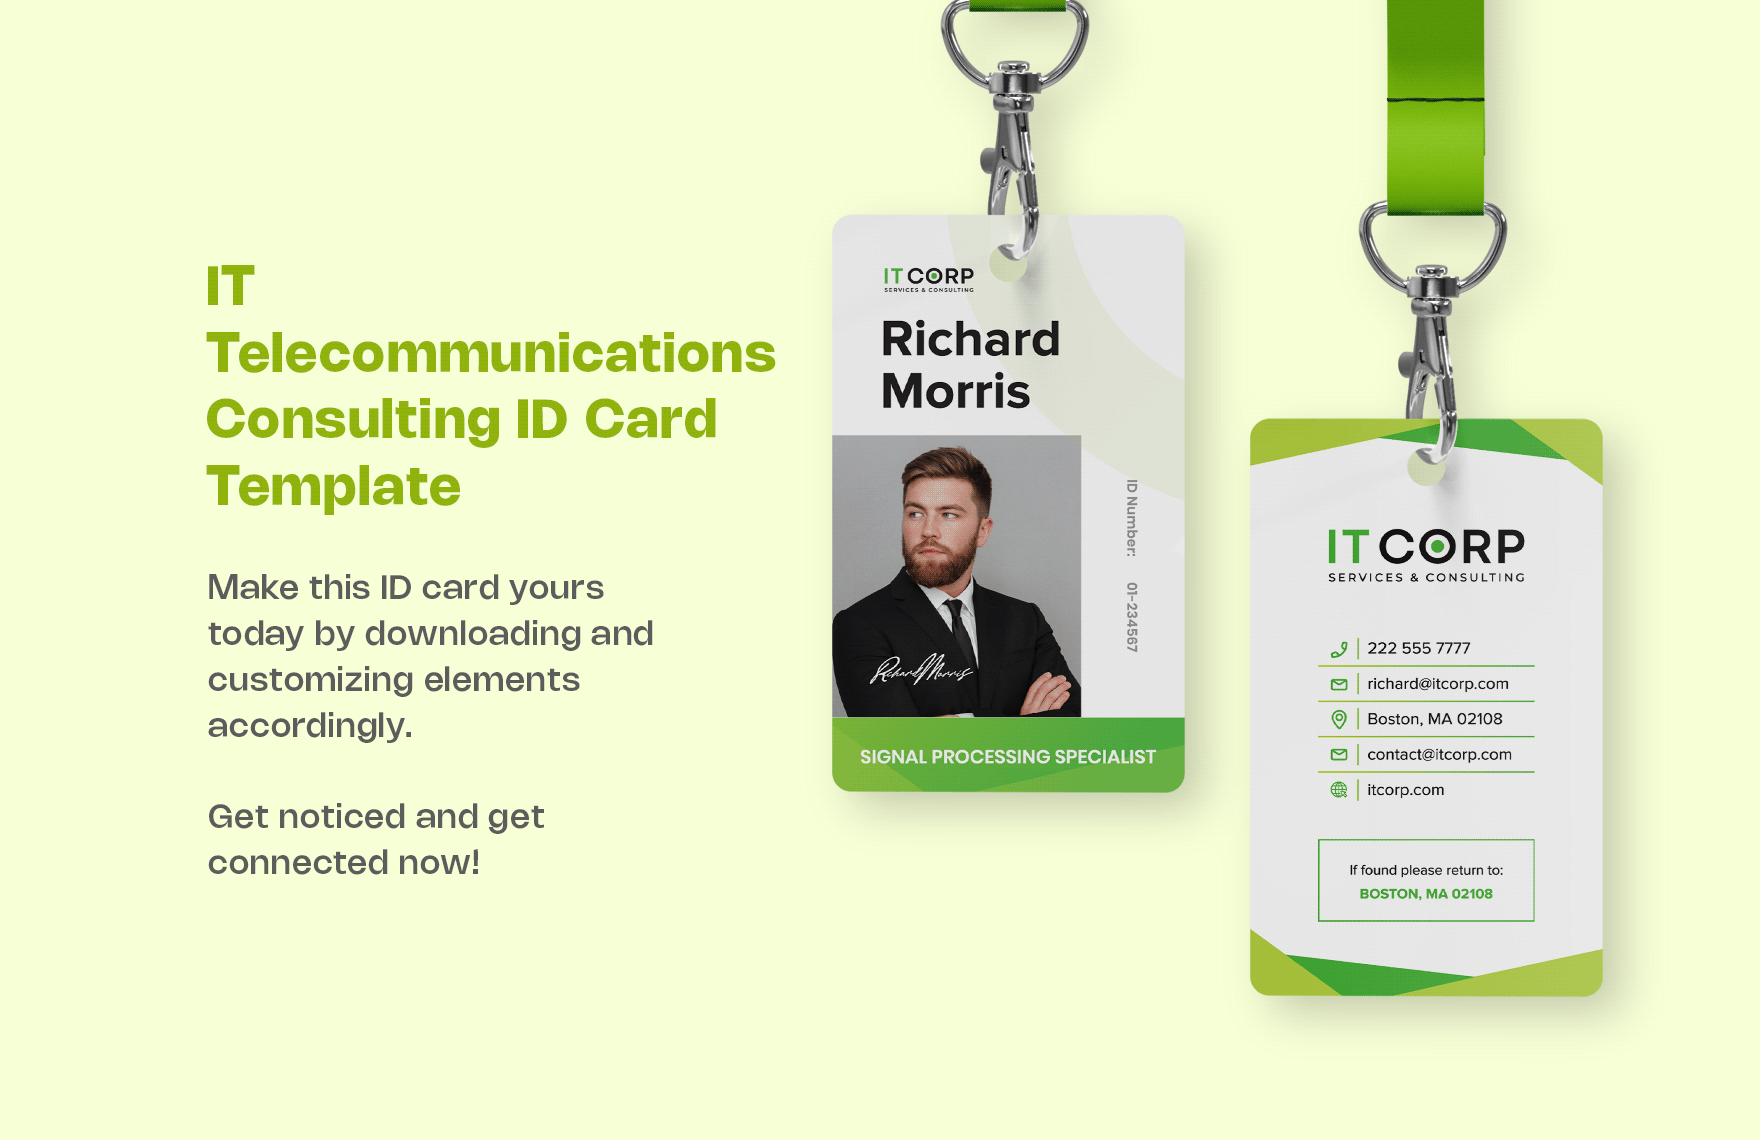 IT Telecommunications Consulting ID Card Template